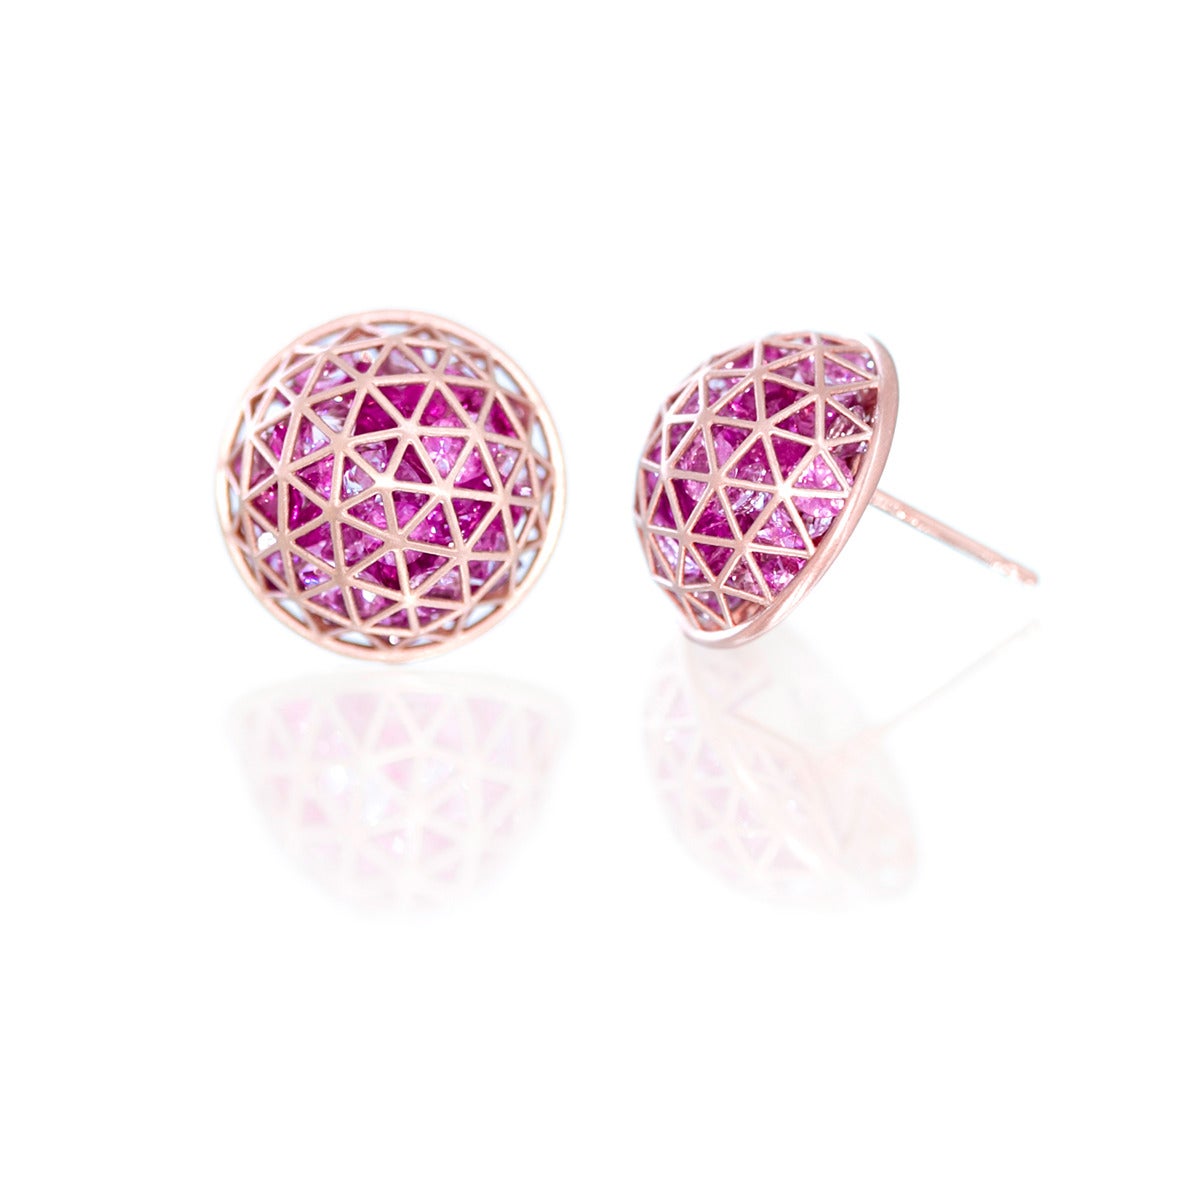 From the Wired Collection, a pair of 18k rose gold earrings with loose pink sapphires (17 cts). Geodesic pattern, on posts. Diameter 16mm or approx 5/8